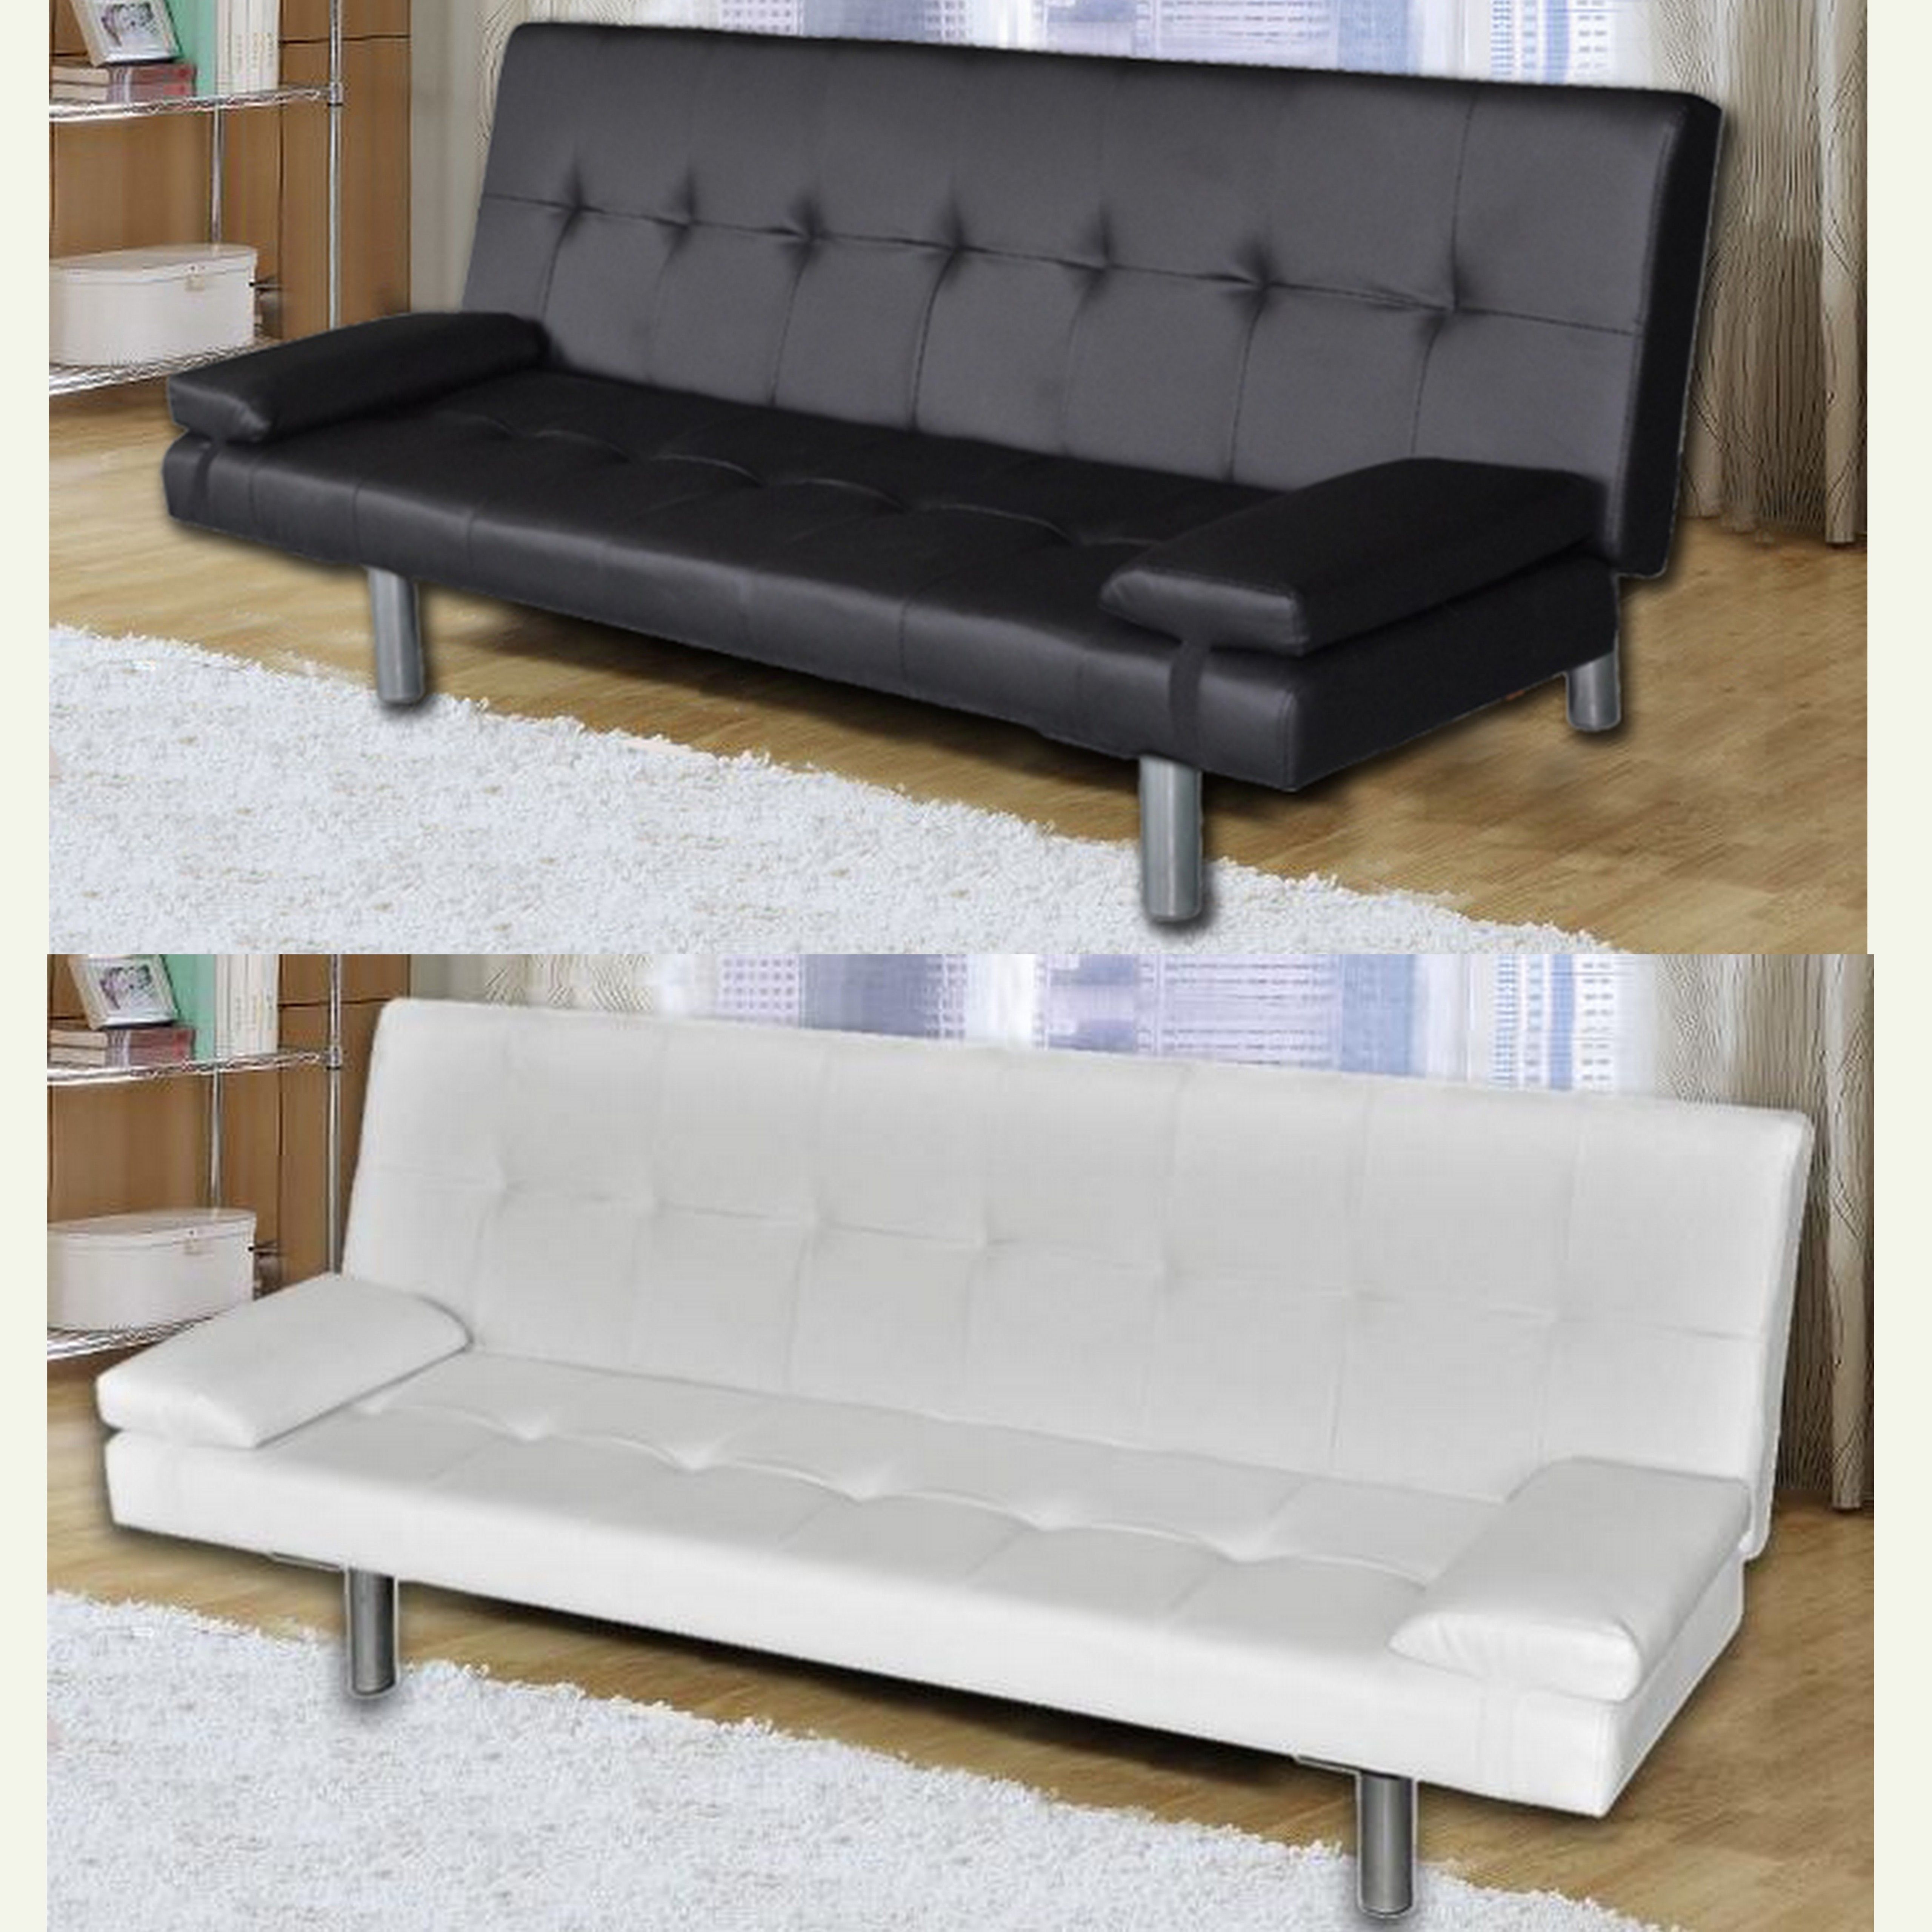 Sofa Bed With Armrests Side Pillows